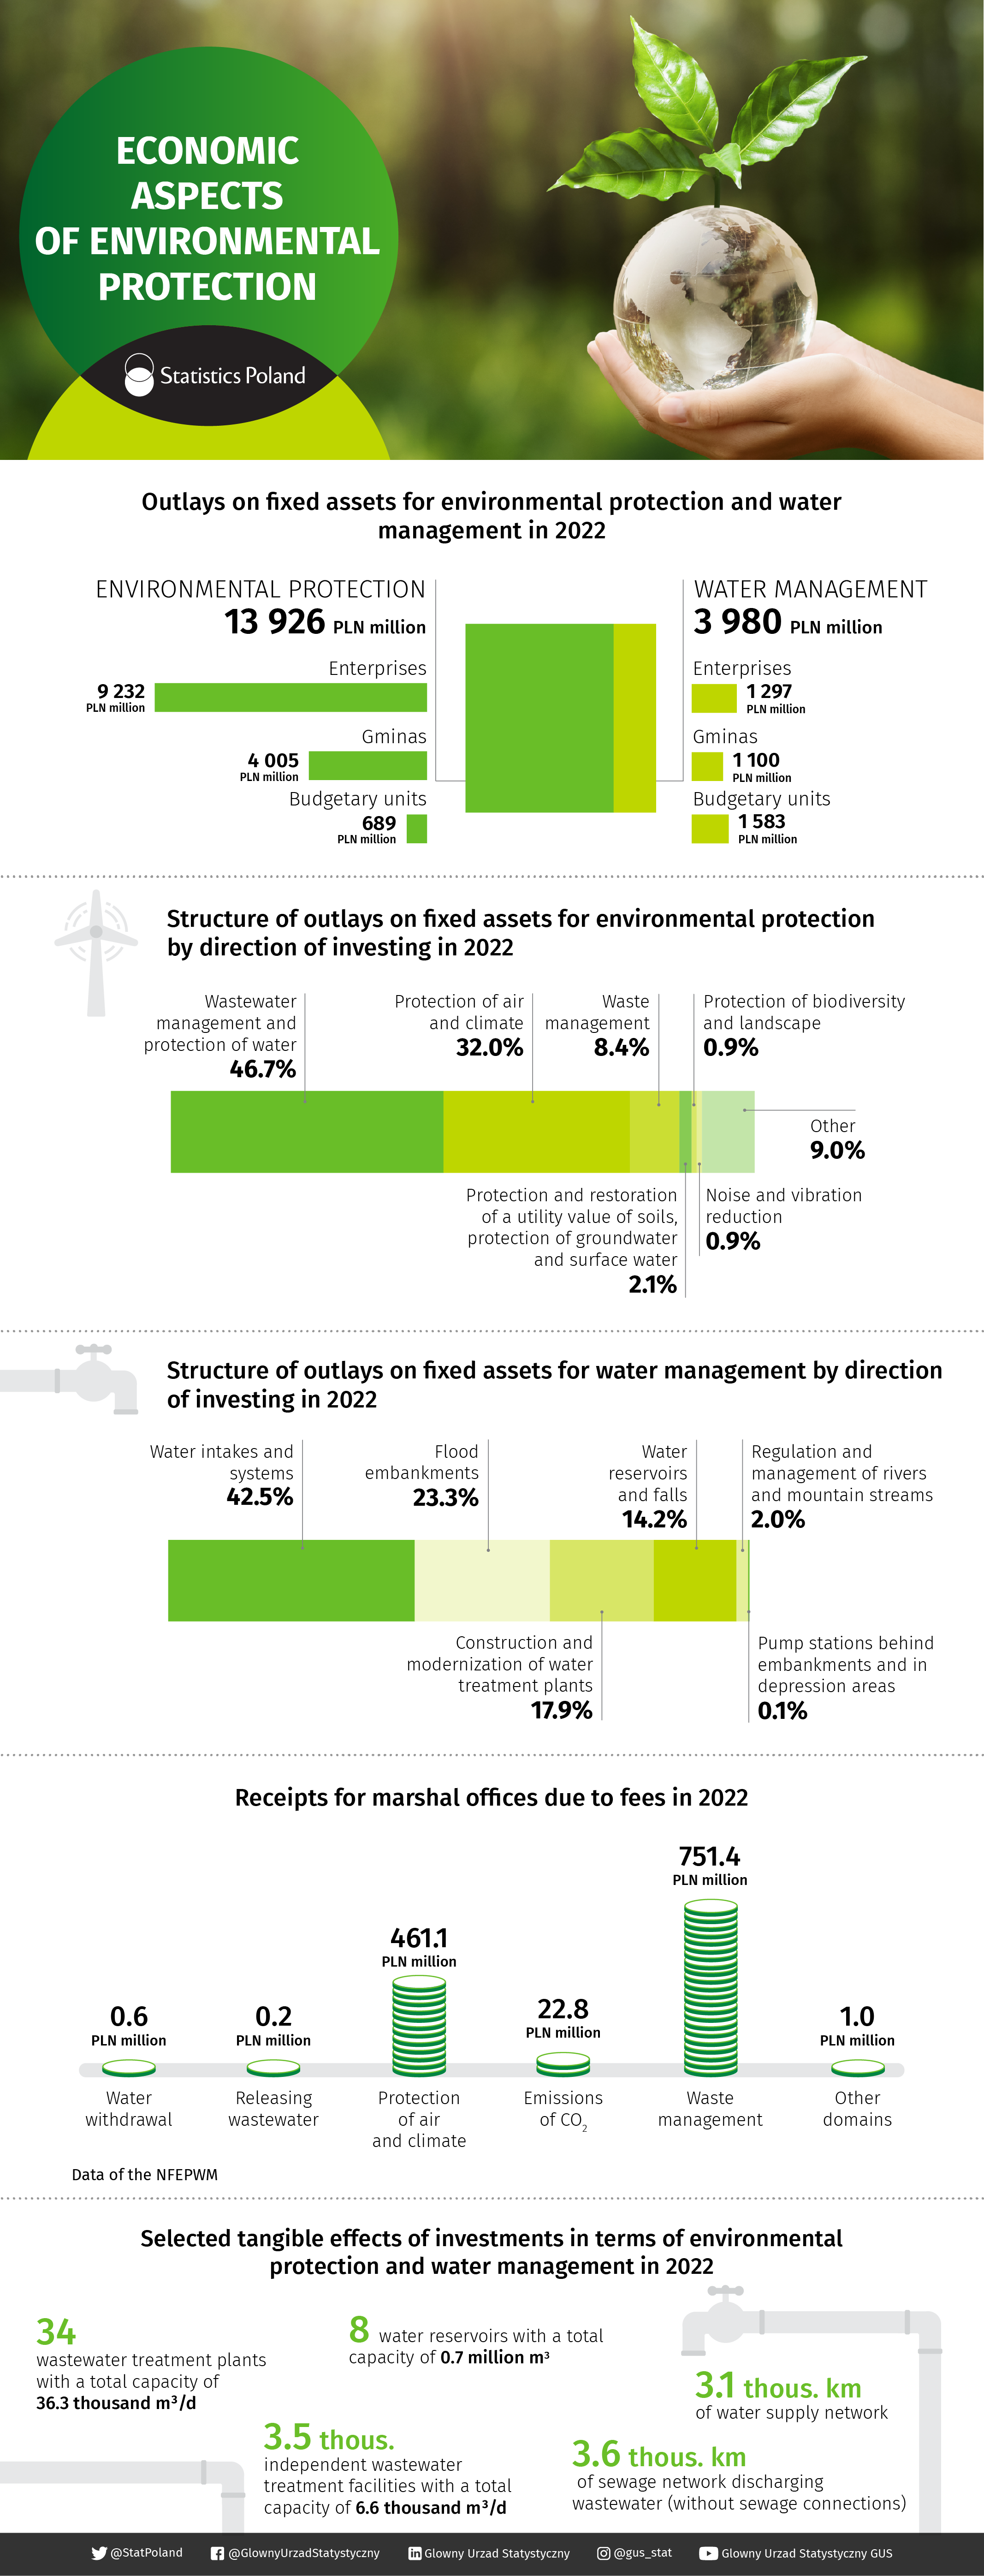 Infographic - Economic aspects of environmental protection 2022. Data for the infographic can be found in the Excel file attached below